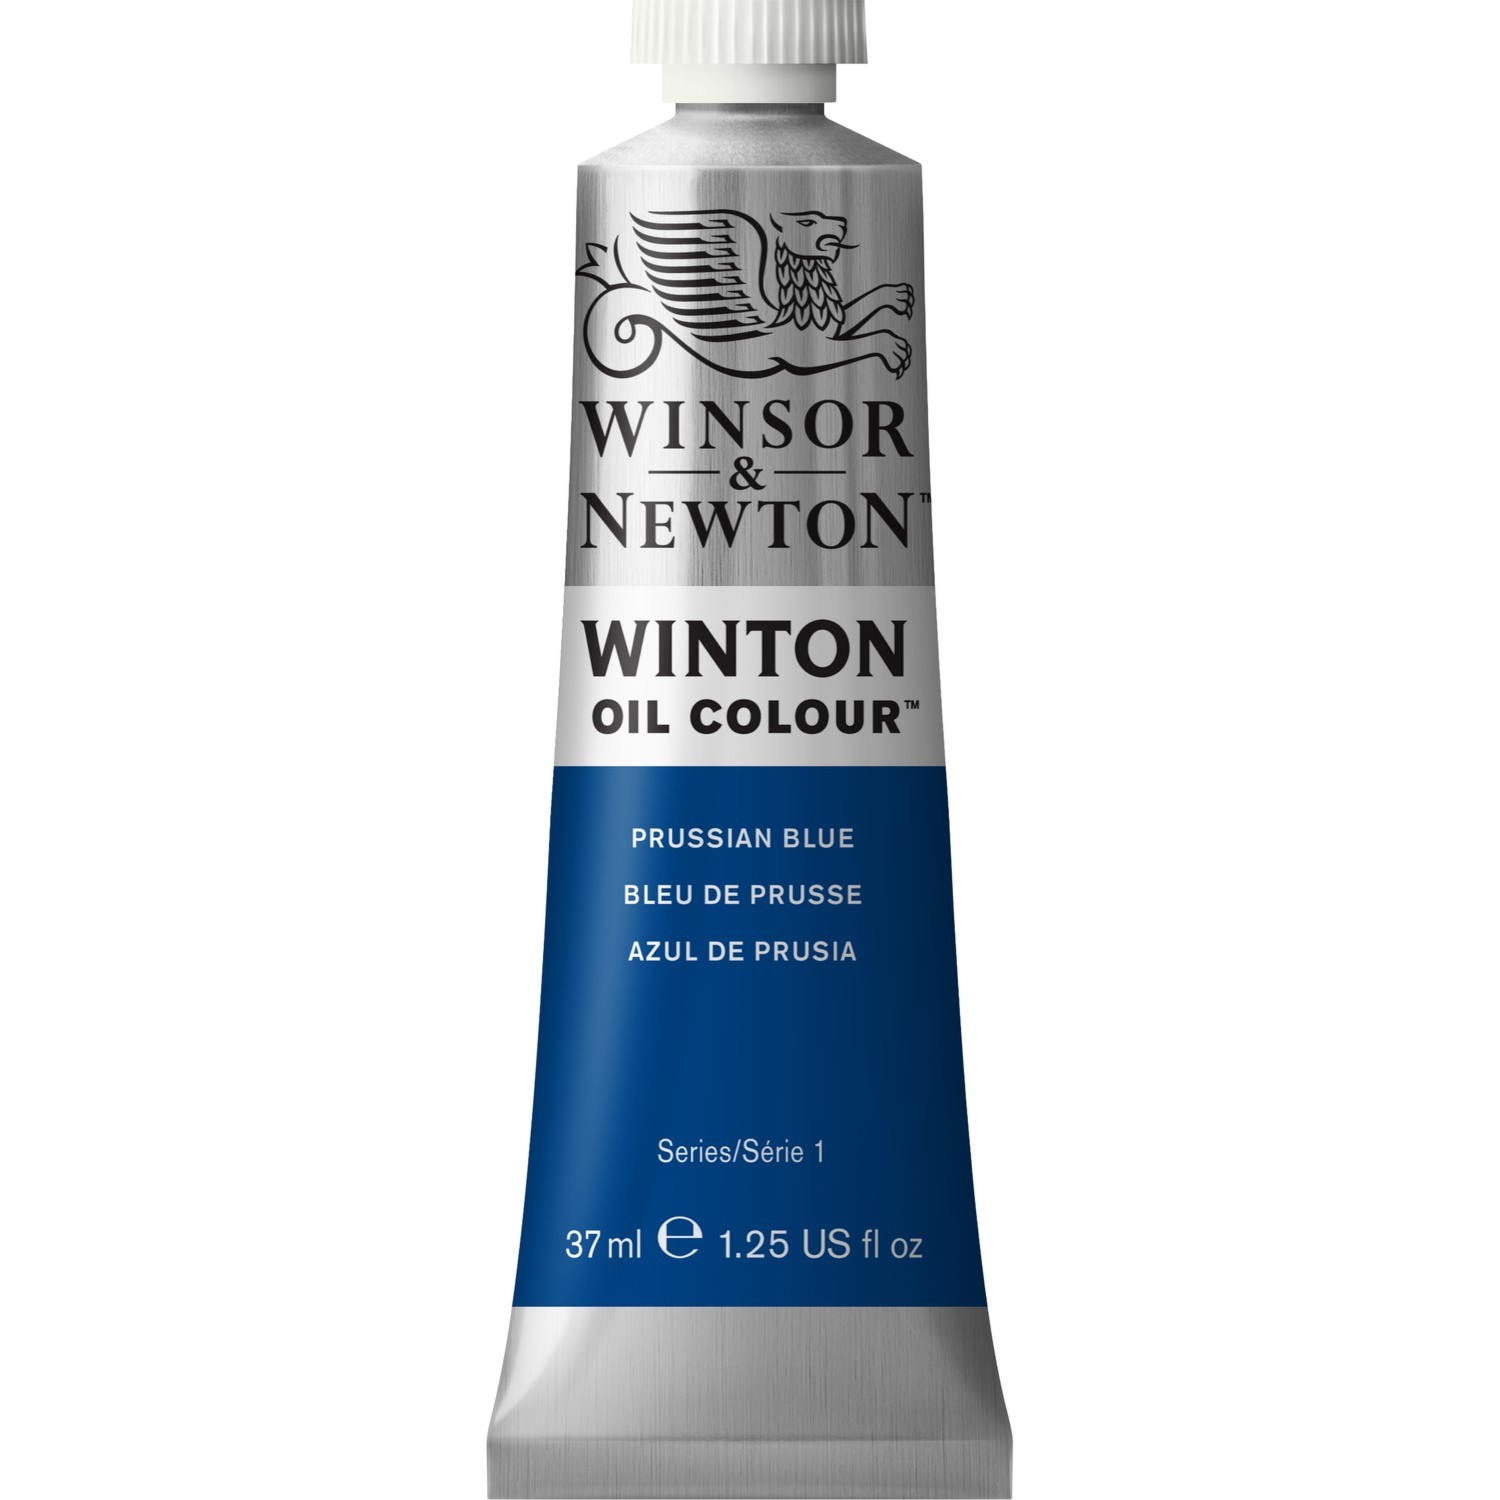 Winsor and Newton 37ml Winton Oil Colours - Prussian Blue Image 1